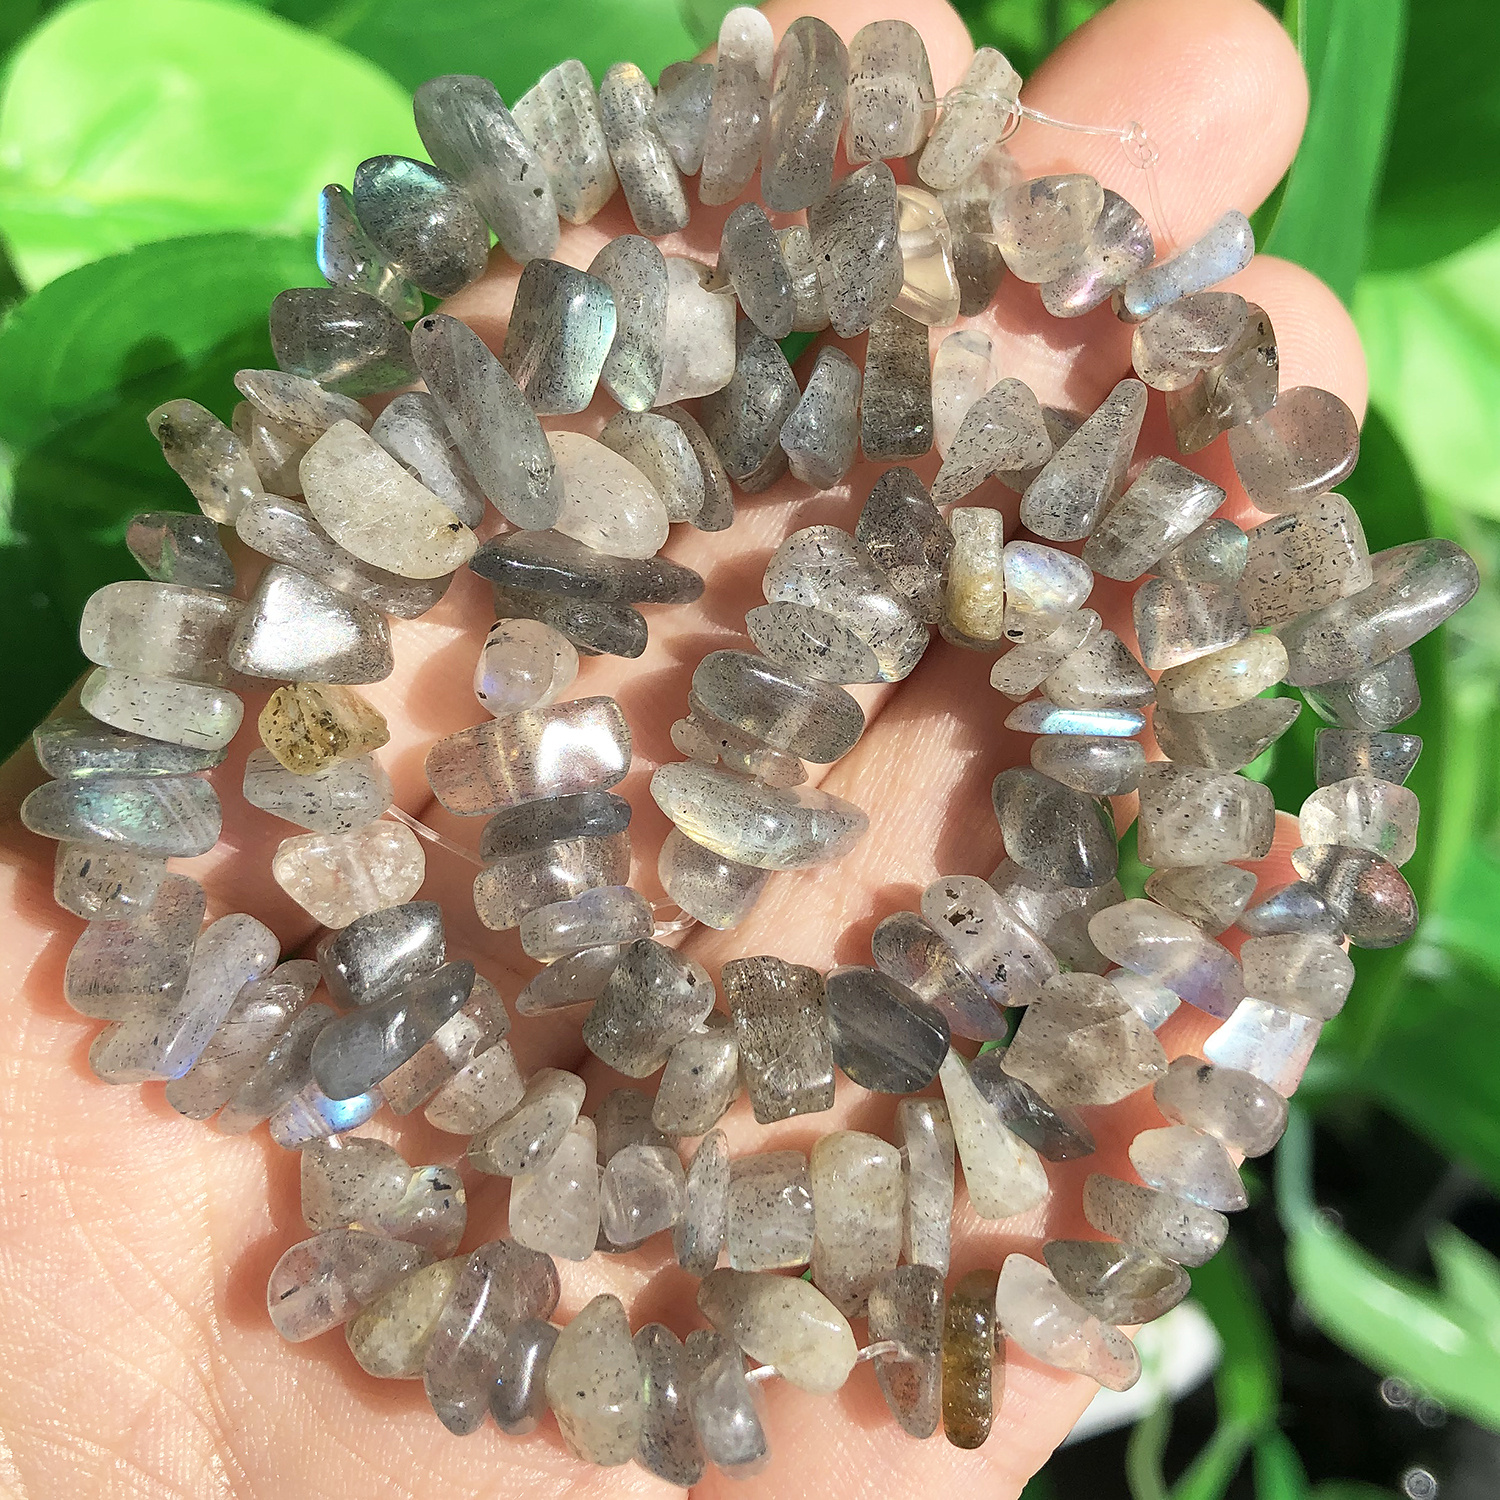 30 Inch Crushed Shell Beads for Jewelry Making, Natural Shell Stone Chips  Beads 2 Strand 5-8mm Hole Drilled, Irregular Shell Beads Crushed Tumbled